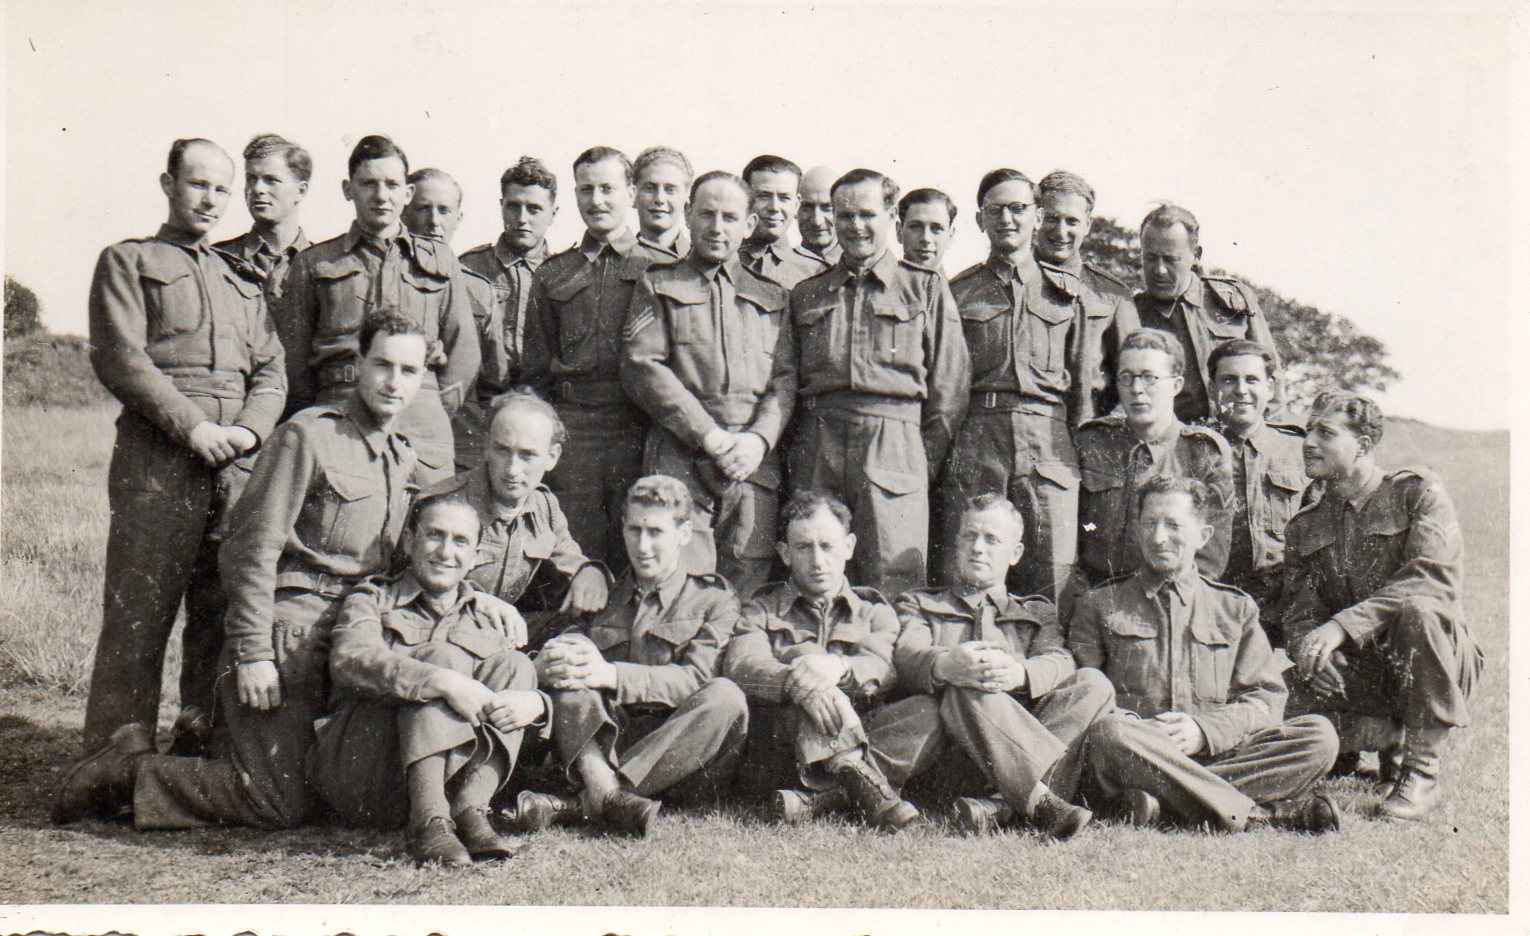 Kitchener camp, army photograph, 1939/40